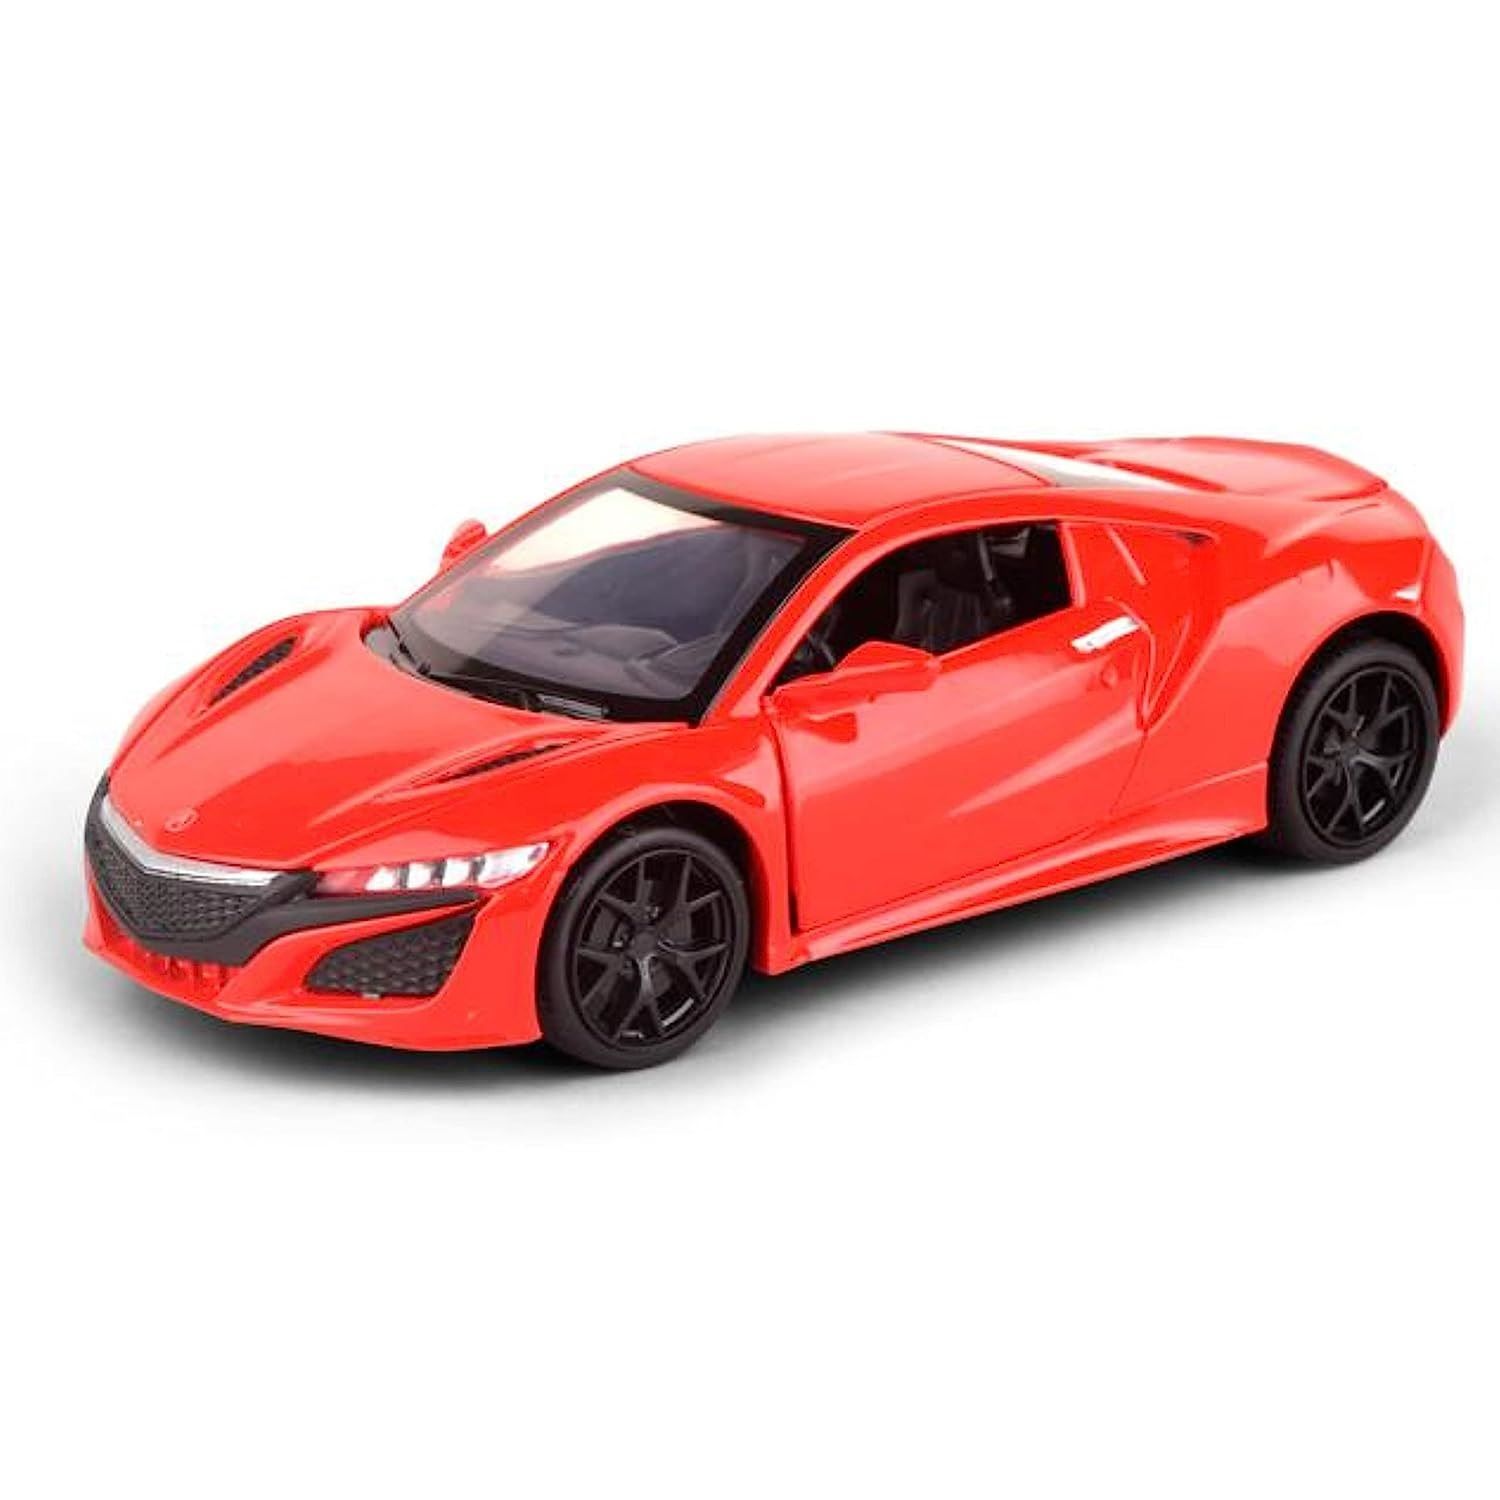 KTRS ENTERPRISE 1:32 Scale NSX Acura with Openable Doors with Sound and Light and Pull Back Action Best Gift Your Children Pack of 1 Pcs